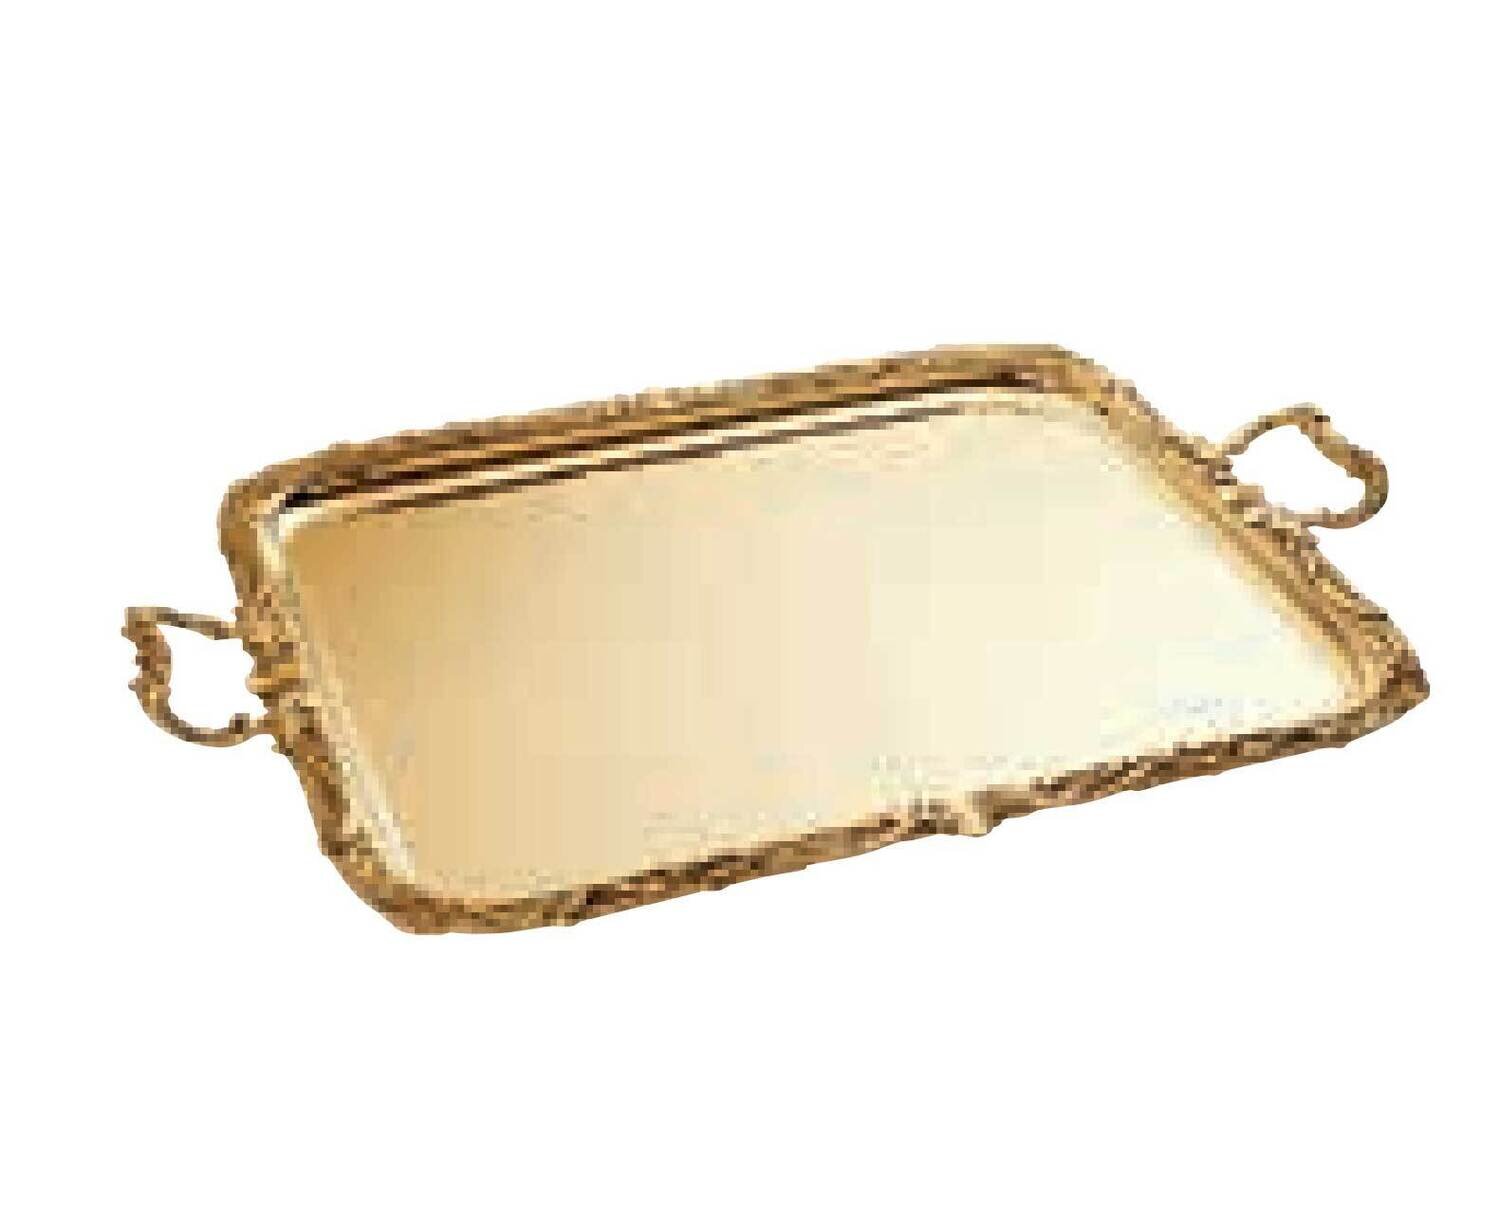 Ercuis Regence Rectangular Serving Tray With Handles 22.5 x 18.875 Inch Silver Plated F506450-57